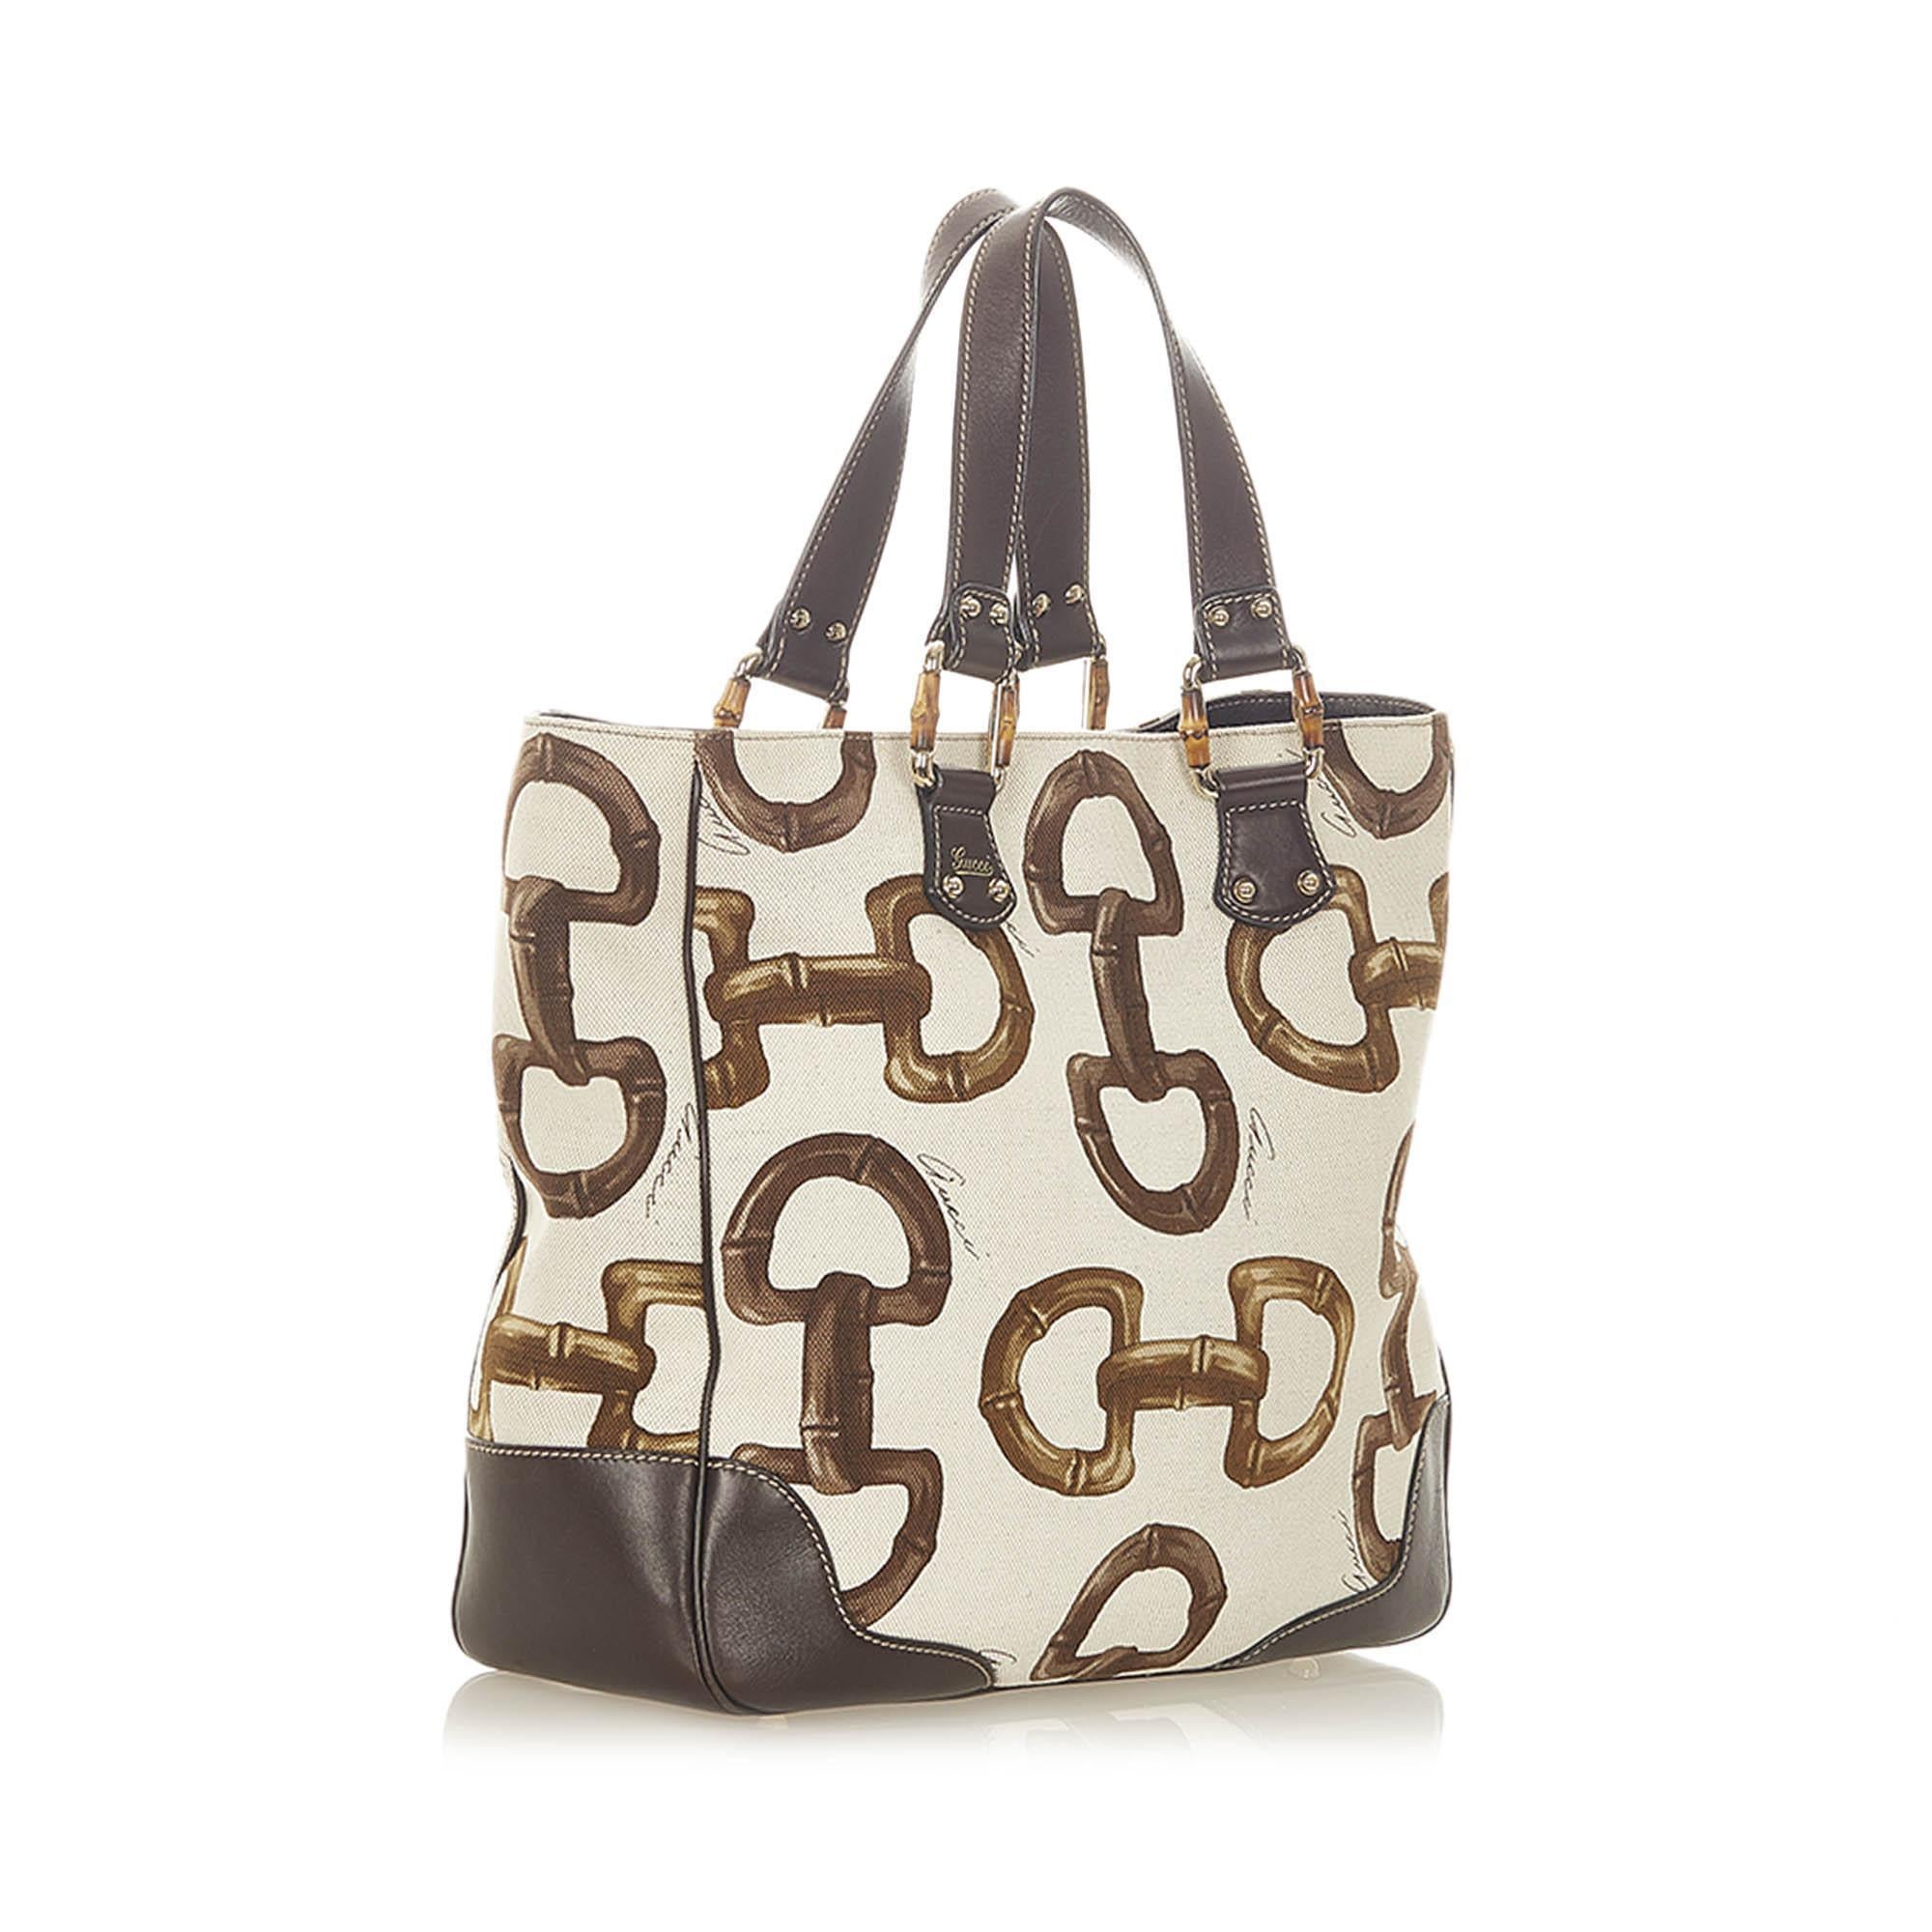 Gucci Bamboo Horsebit Canvas Tote bag.
Very good condition, show some light signs of use and wear but nothing visible. A beautiful piece to add in your closet!
This tote bag features a printed canvas body with leather trim, flat leather handles, an